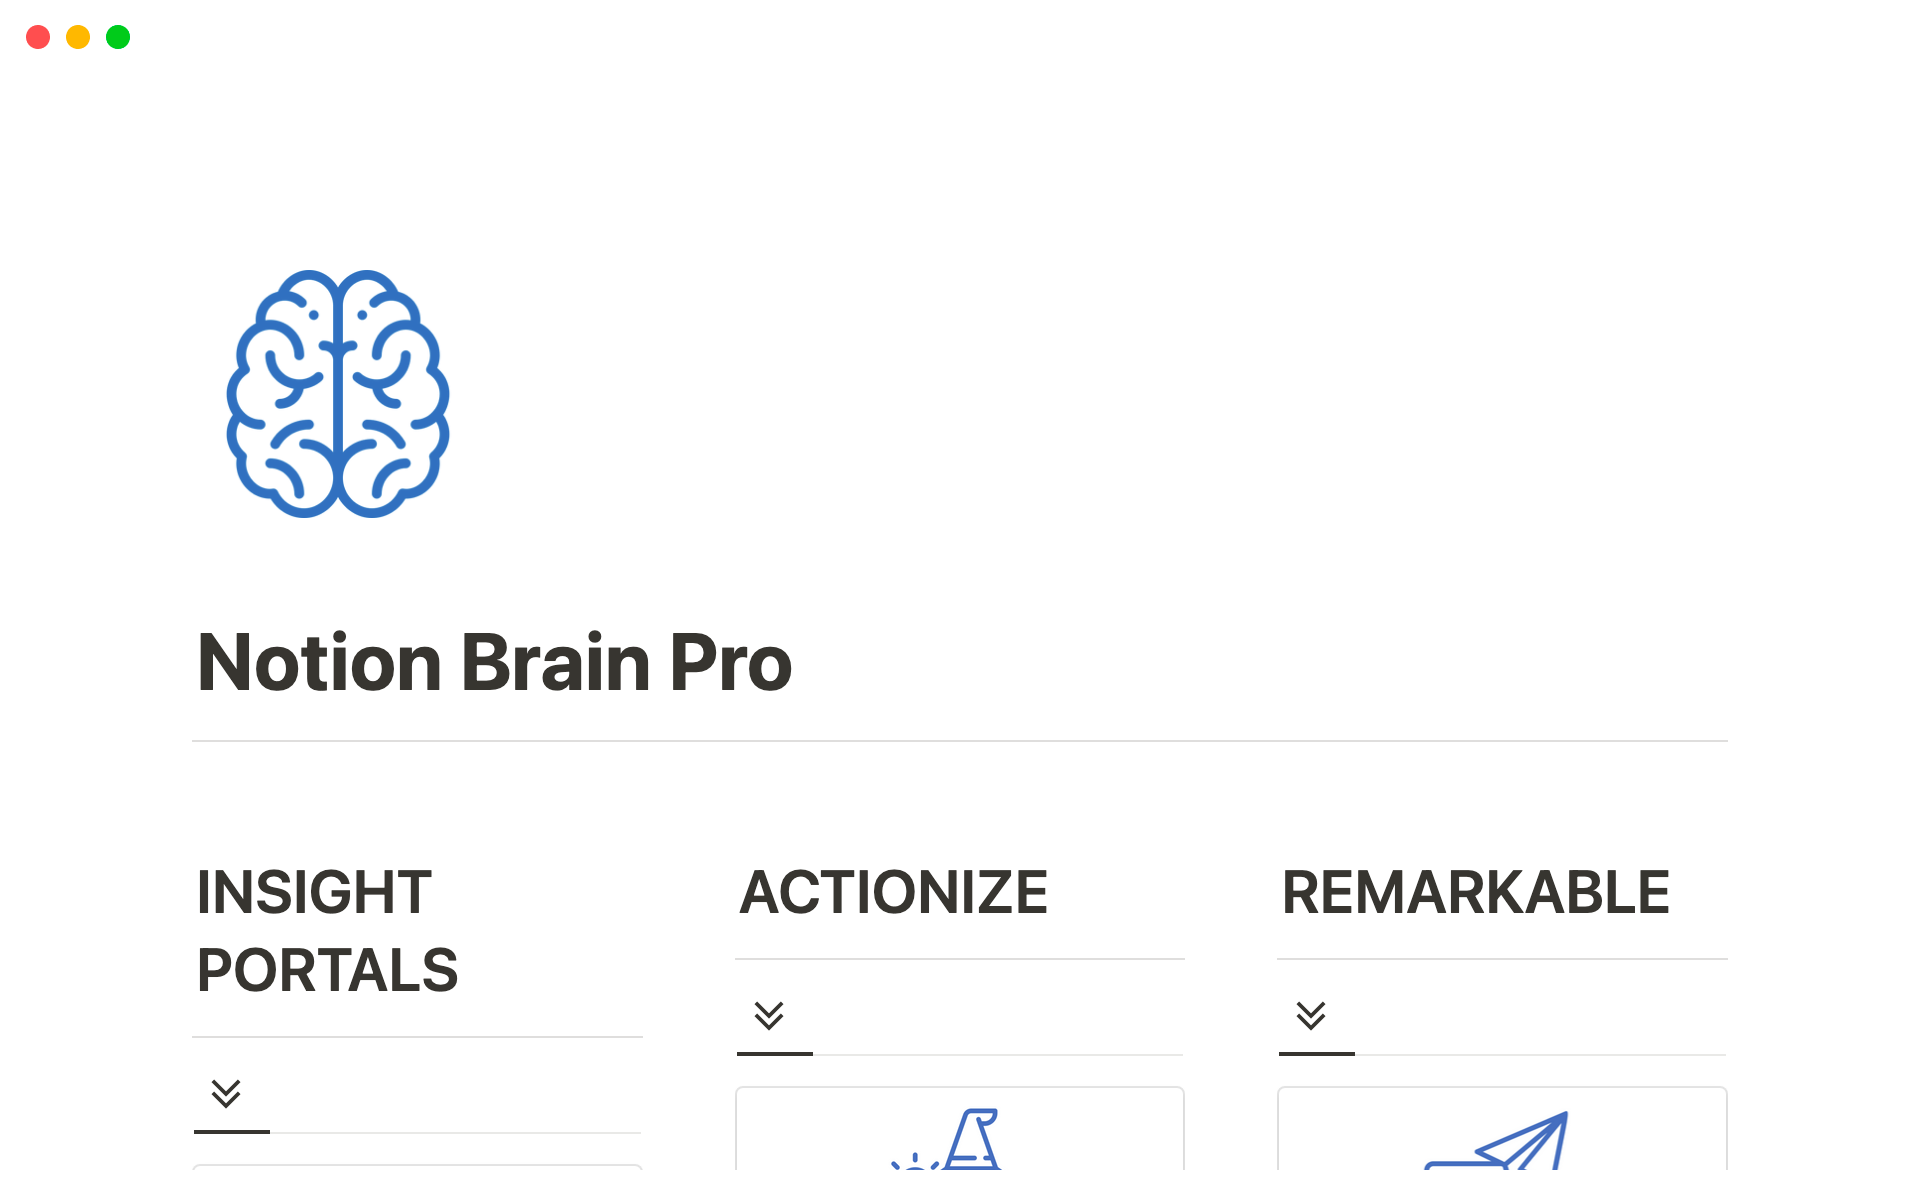 Notion Brain is a comprehensive system designed to capture your notes, tasks, projects, and resources into a single central hub.